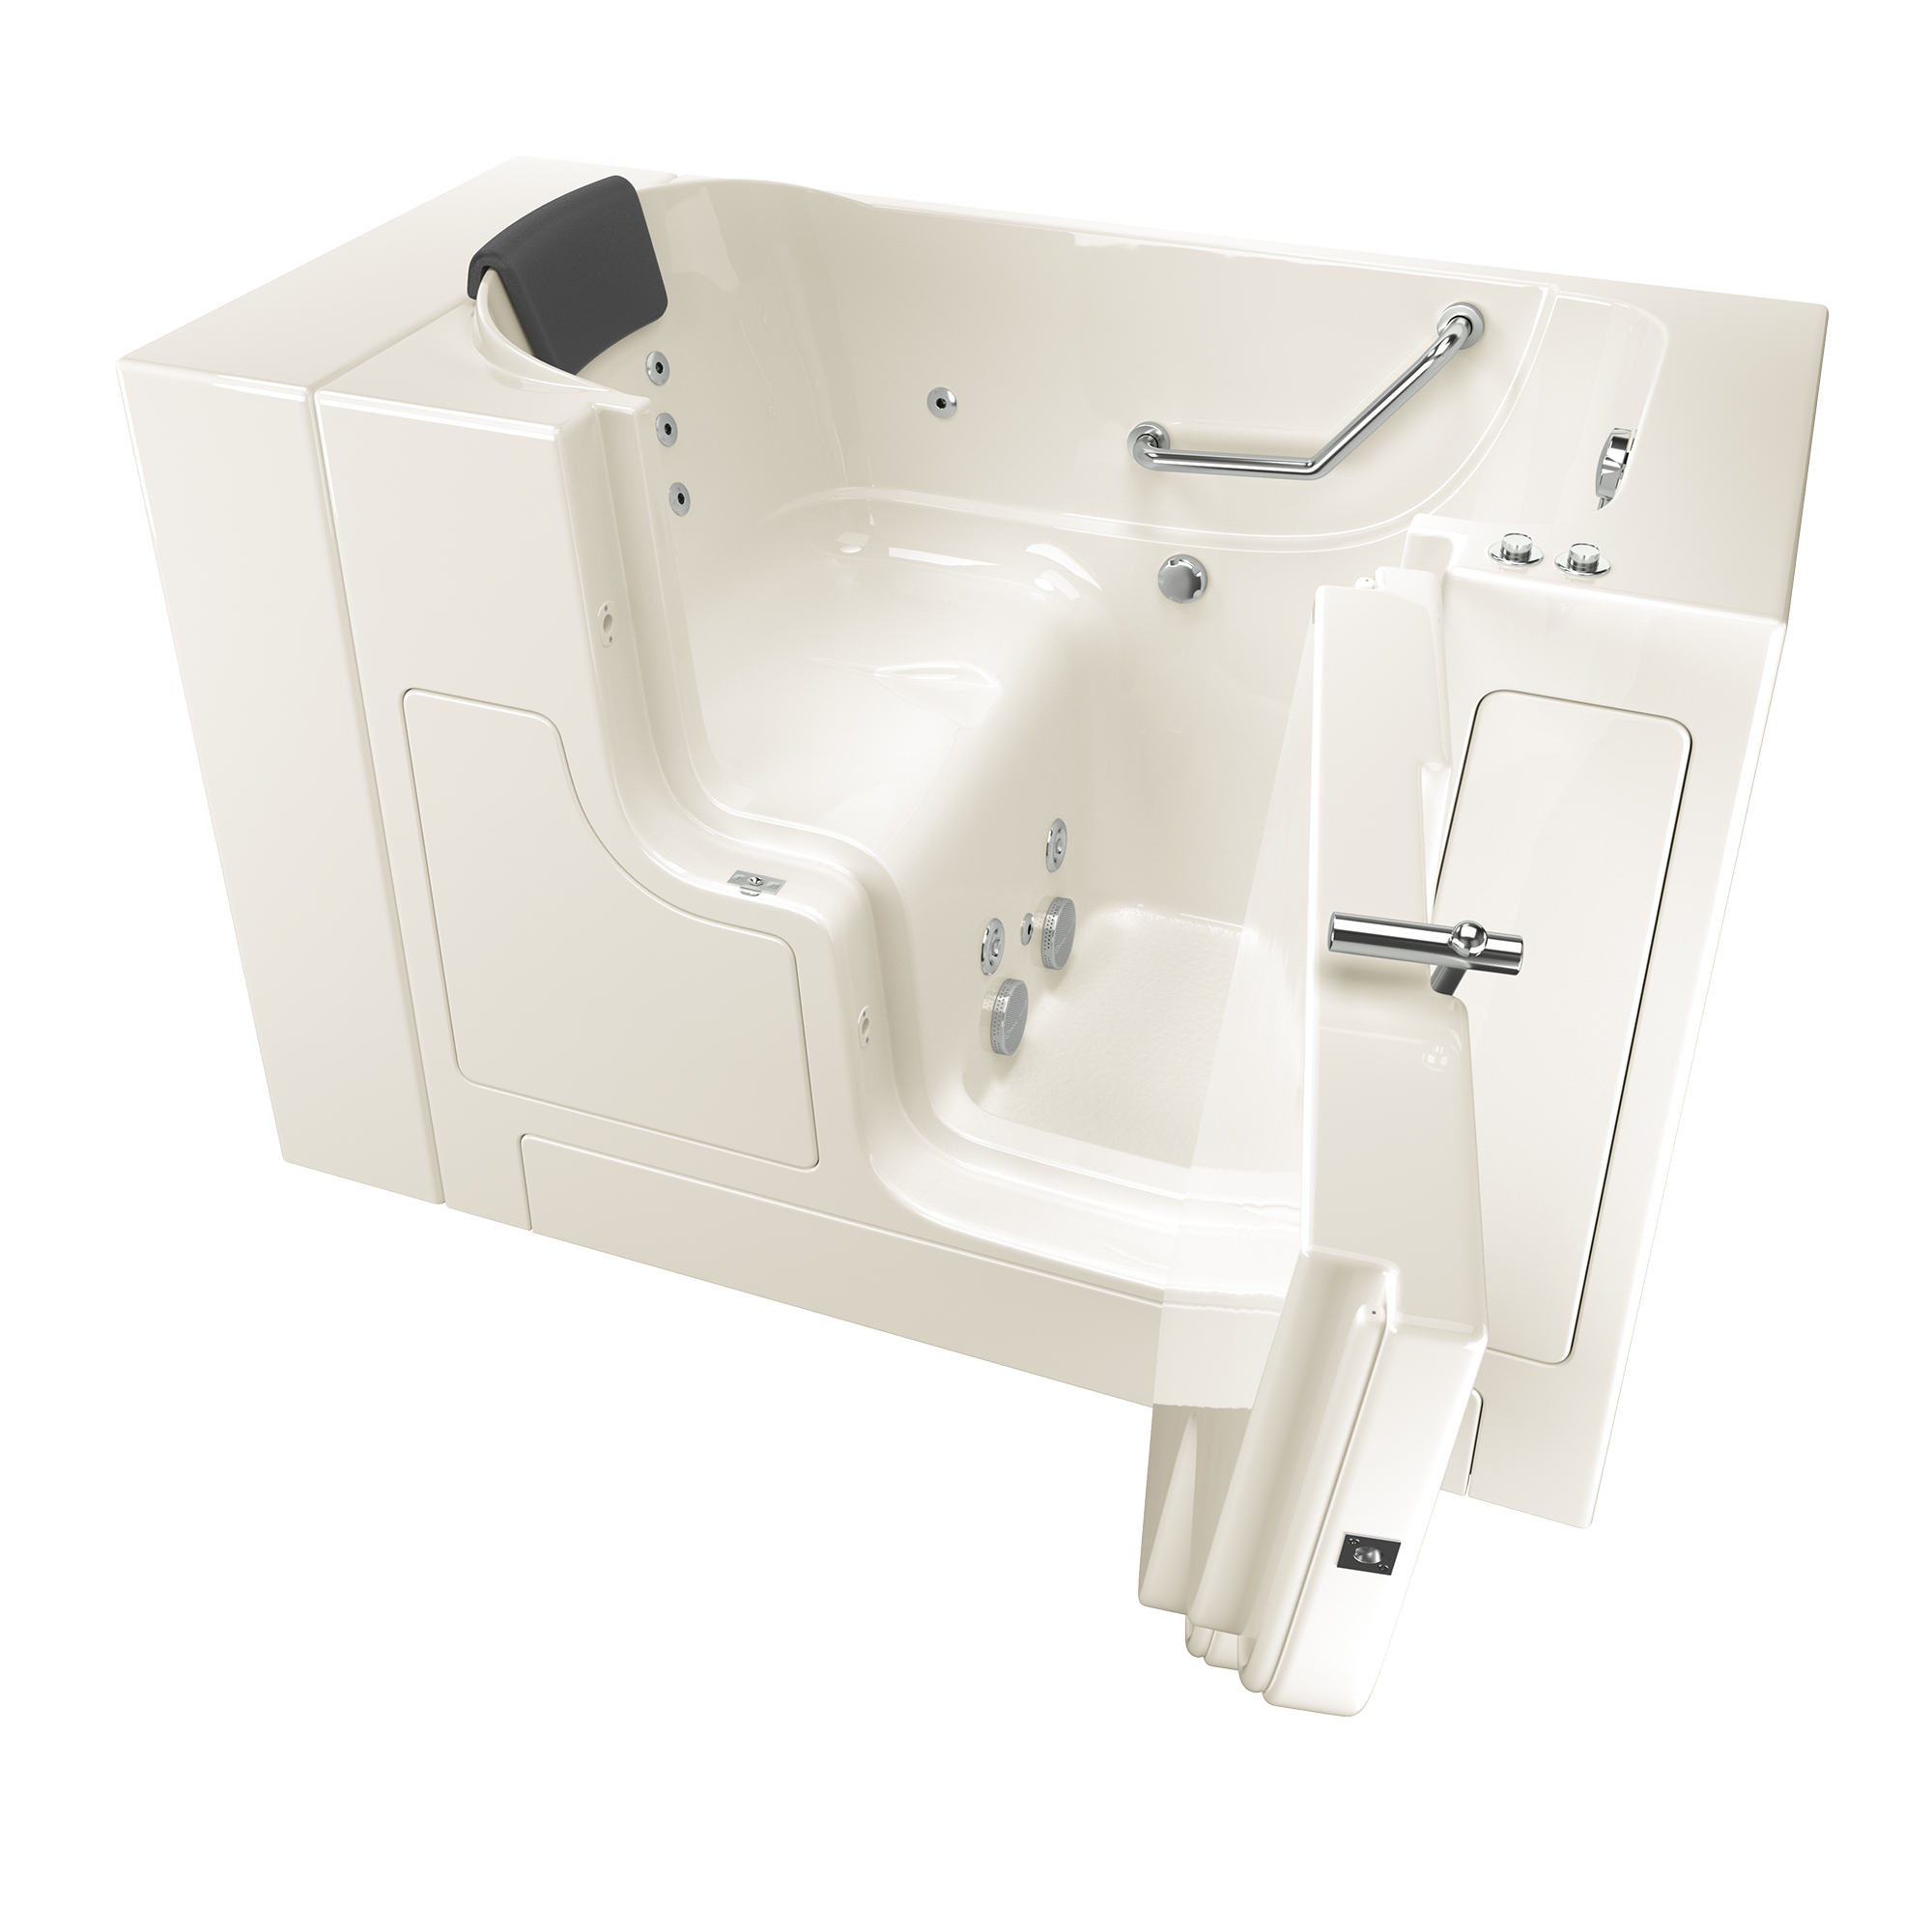 Gelcoat Premium Series 30 x 52 -Inch Walk-in Tub With Whirlpool System - Right-Hand Drain